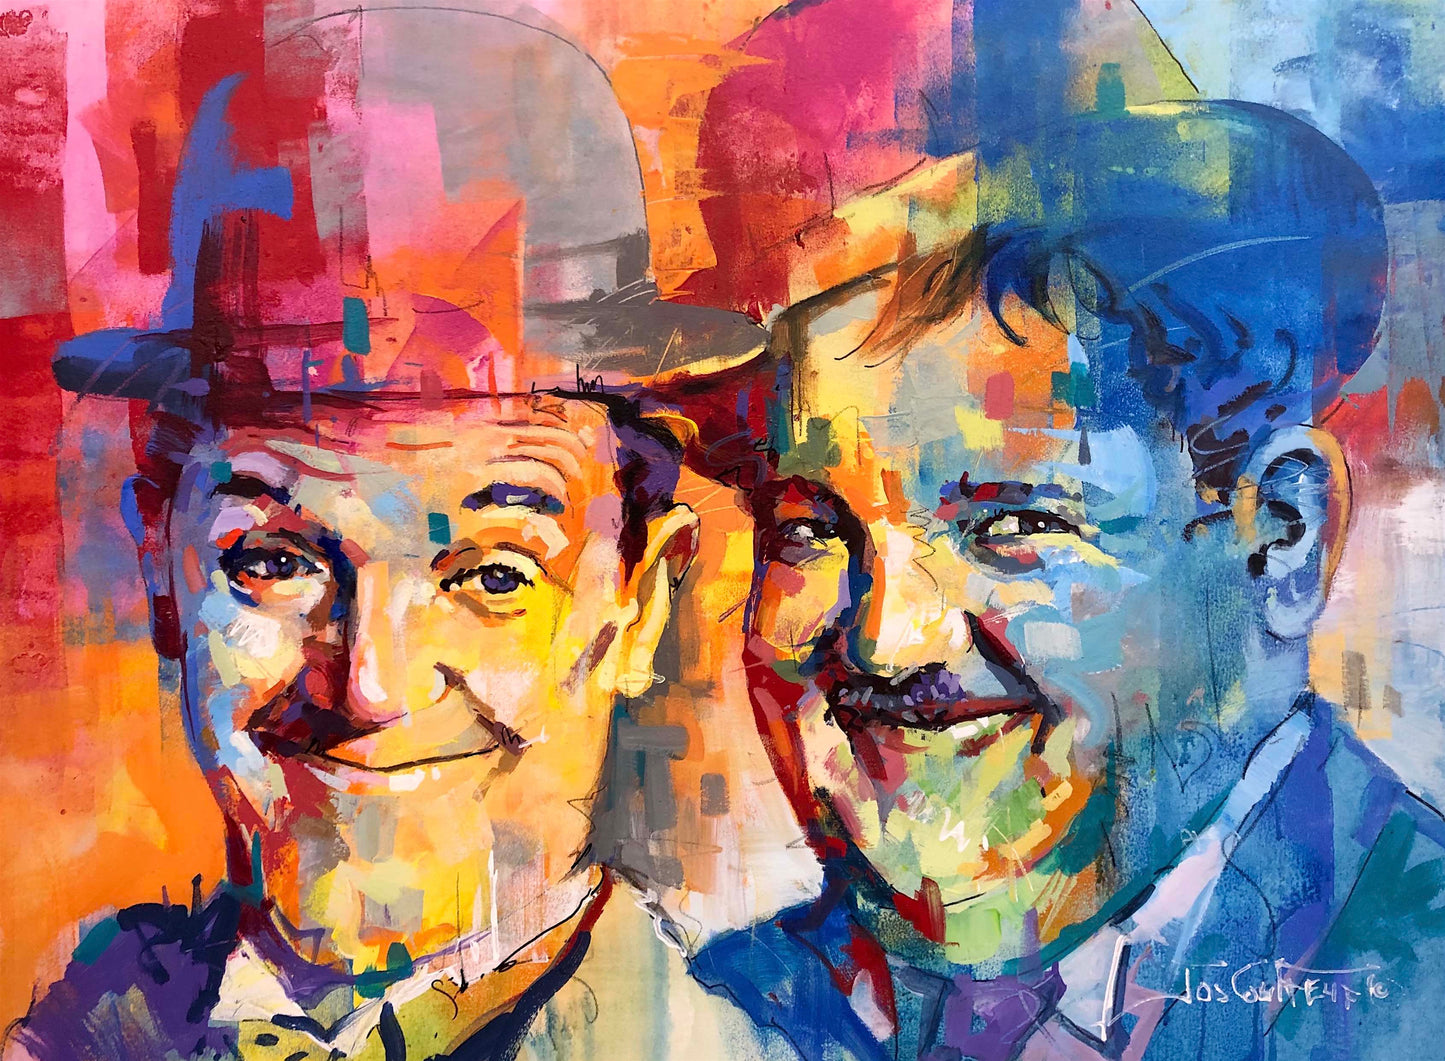 Laurel and Hardy - Comedy Duo